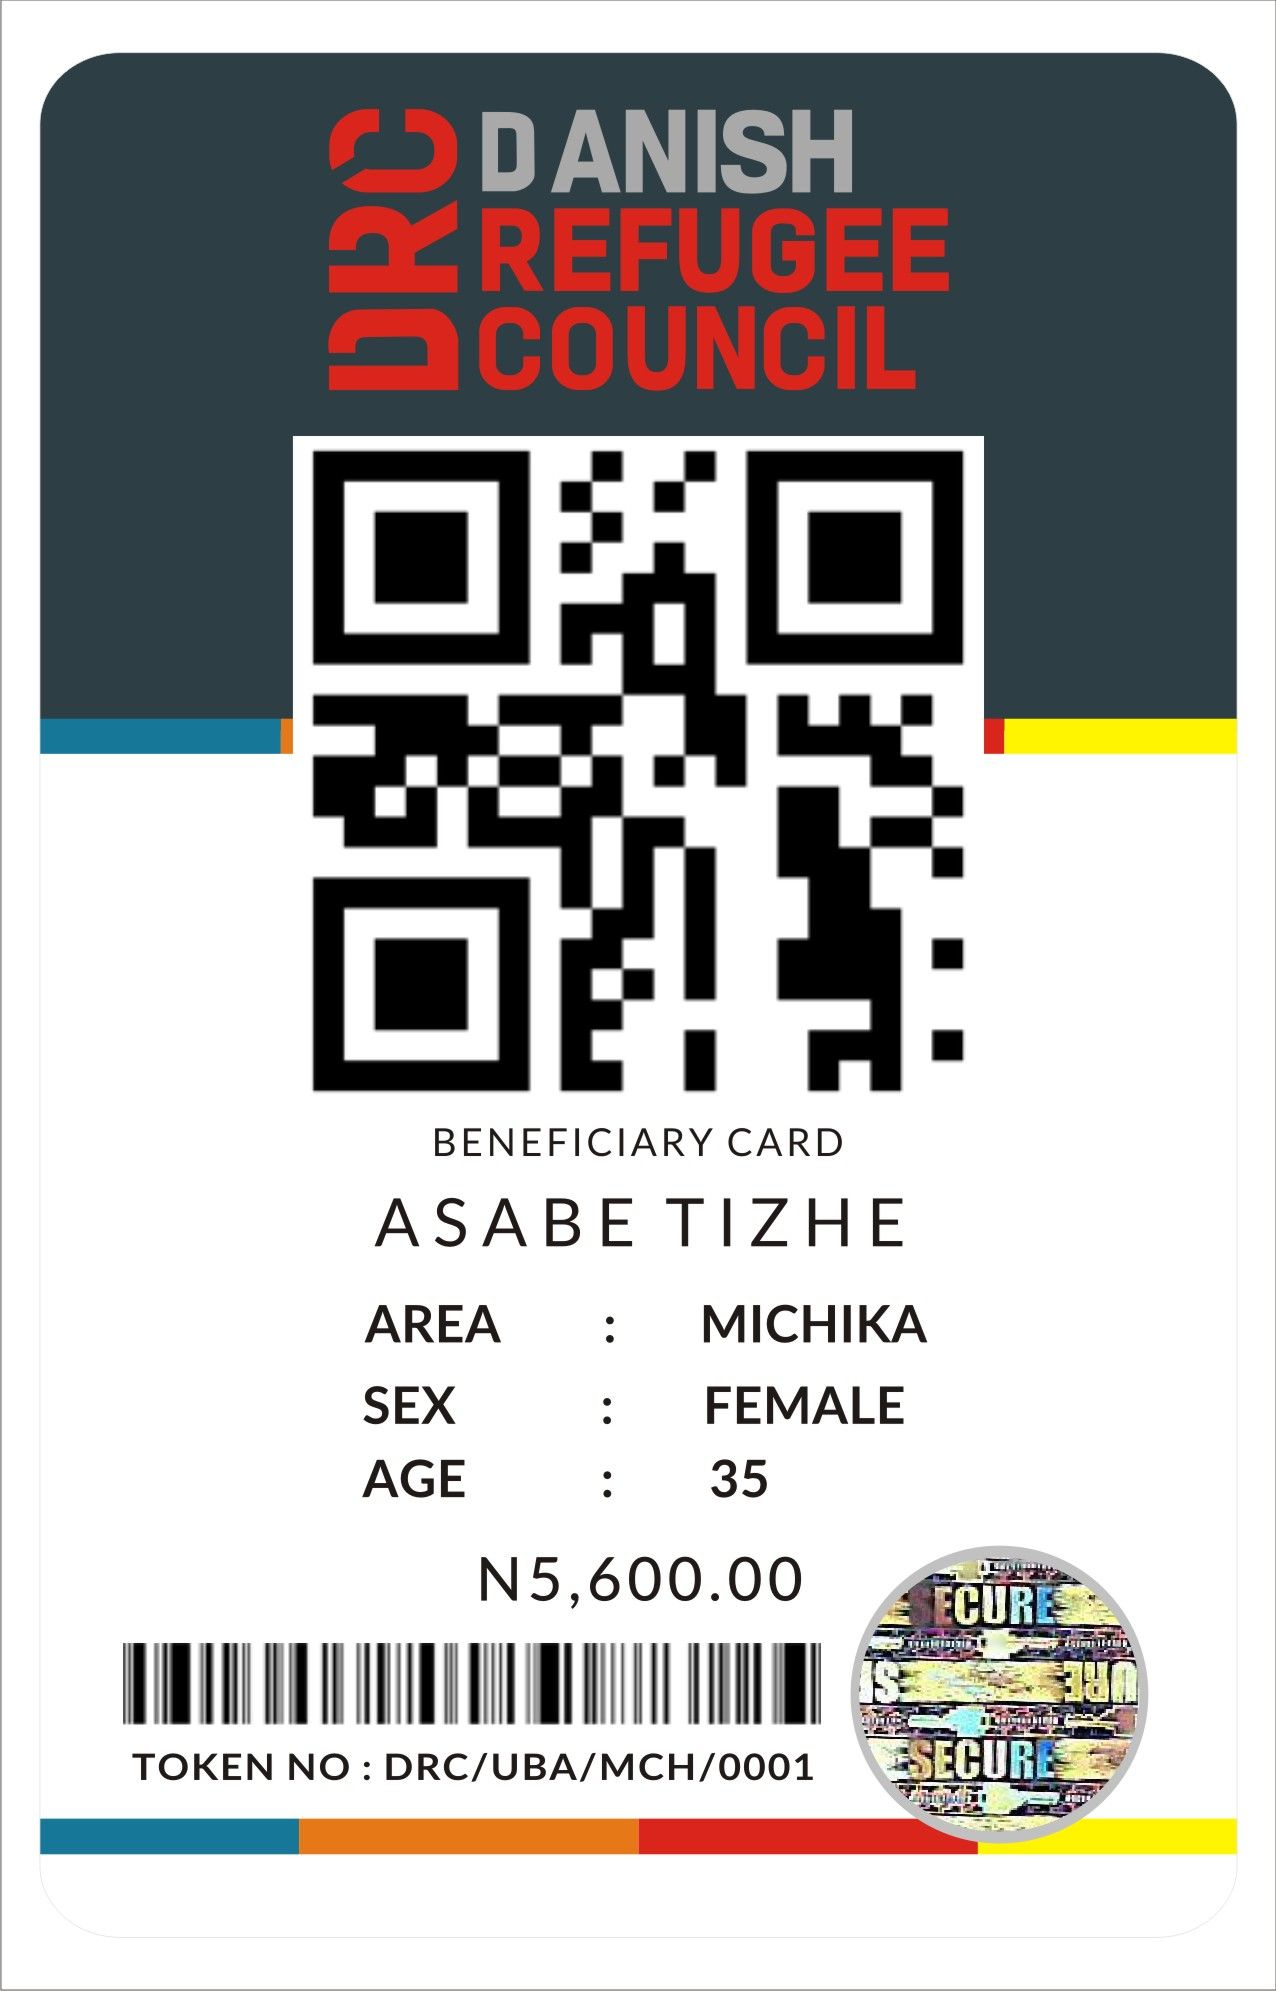 CALL EMMANUEL ON 08176499649, 09021612751 TO PRINT QR CODE, BAR CODE, AUTHENTICATION LABELS ETC